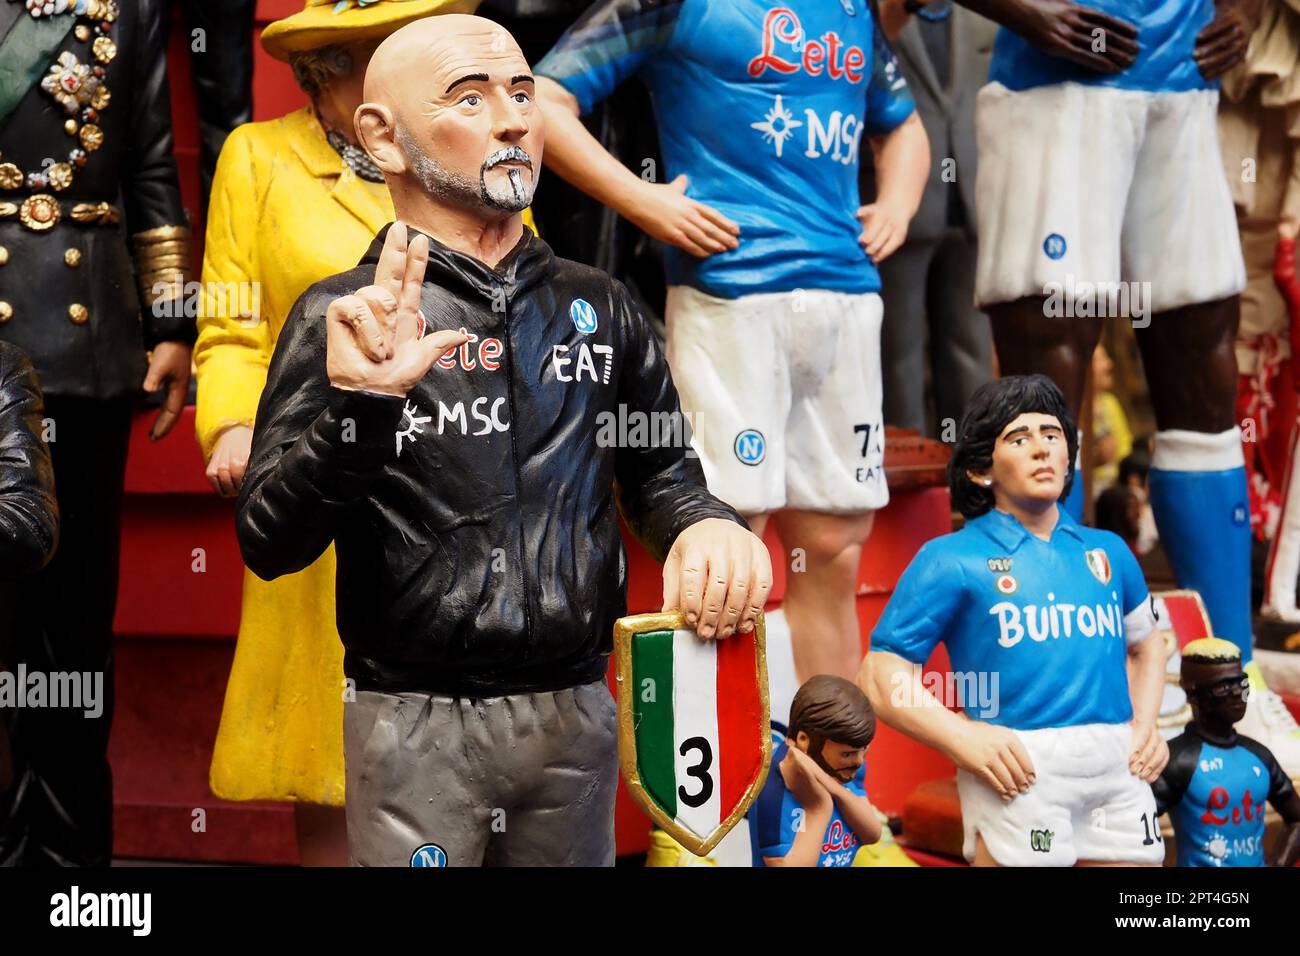 Napoli, Italy. 27th Apr, 2023. Statuette depicting the Napoli coach Luciano Spalletti, during the preparations for the celebration of the victory of the Italian Serie A championship and the third scudetto 'shield with the colors of the Italian flag, which is worn on the game uniform by the team that won the championship in the previous season'. Credit: Vincenzo Izzo/Alamy Live News Stock Photo